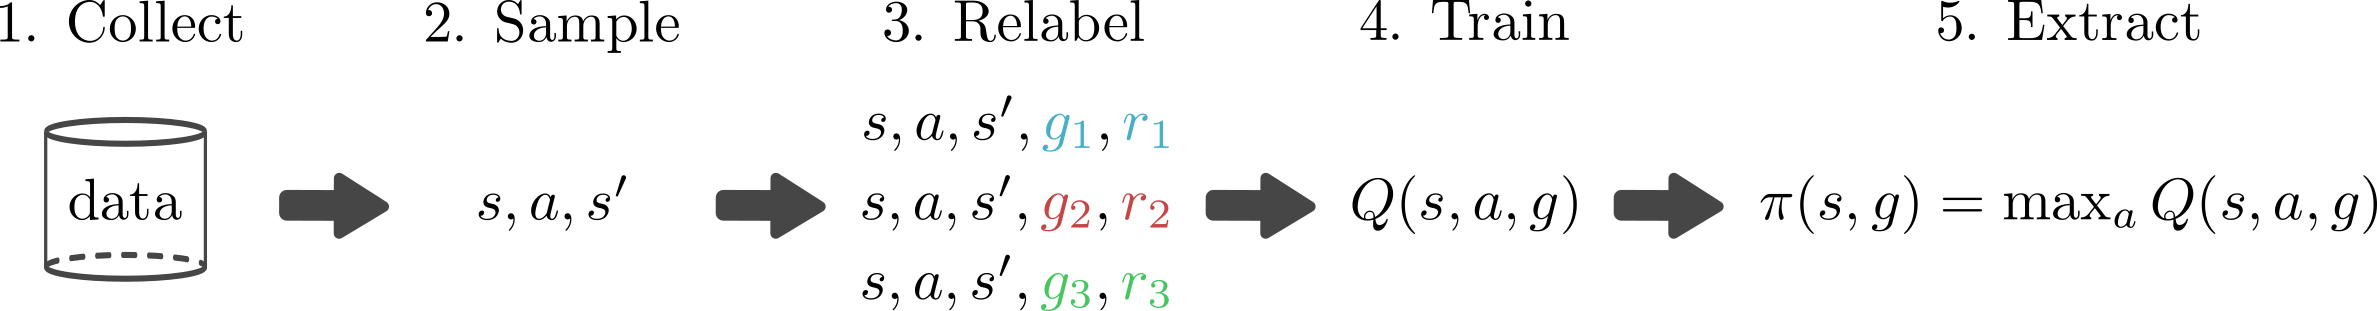 Diagram of Q-learning with relabeling. Collect data, sample from that data, relabel the goal and reward, train a Q function, and extract a policy.